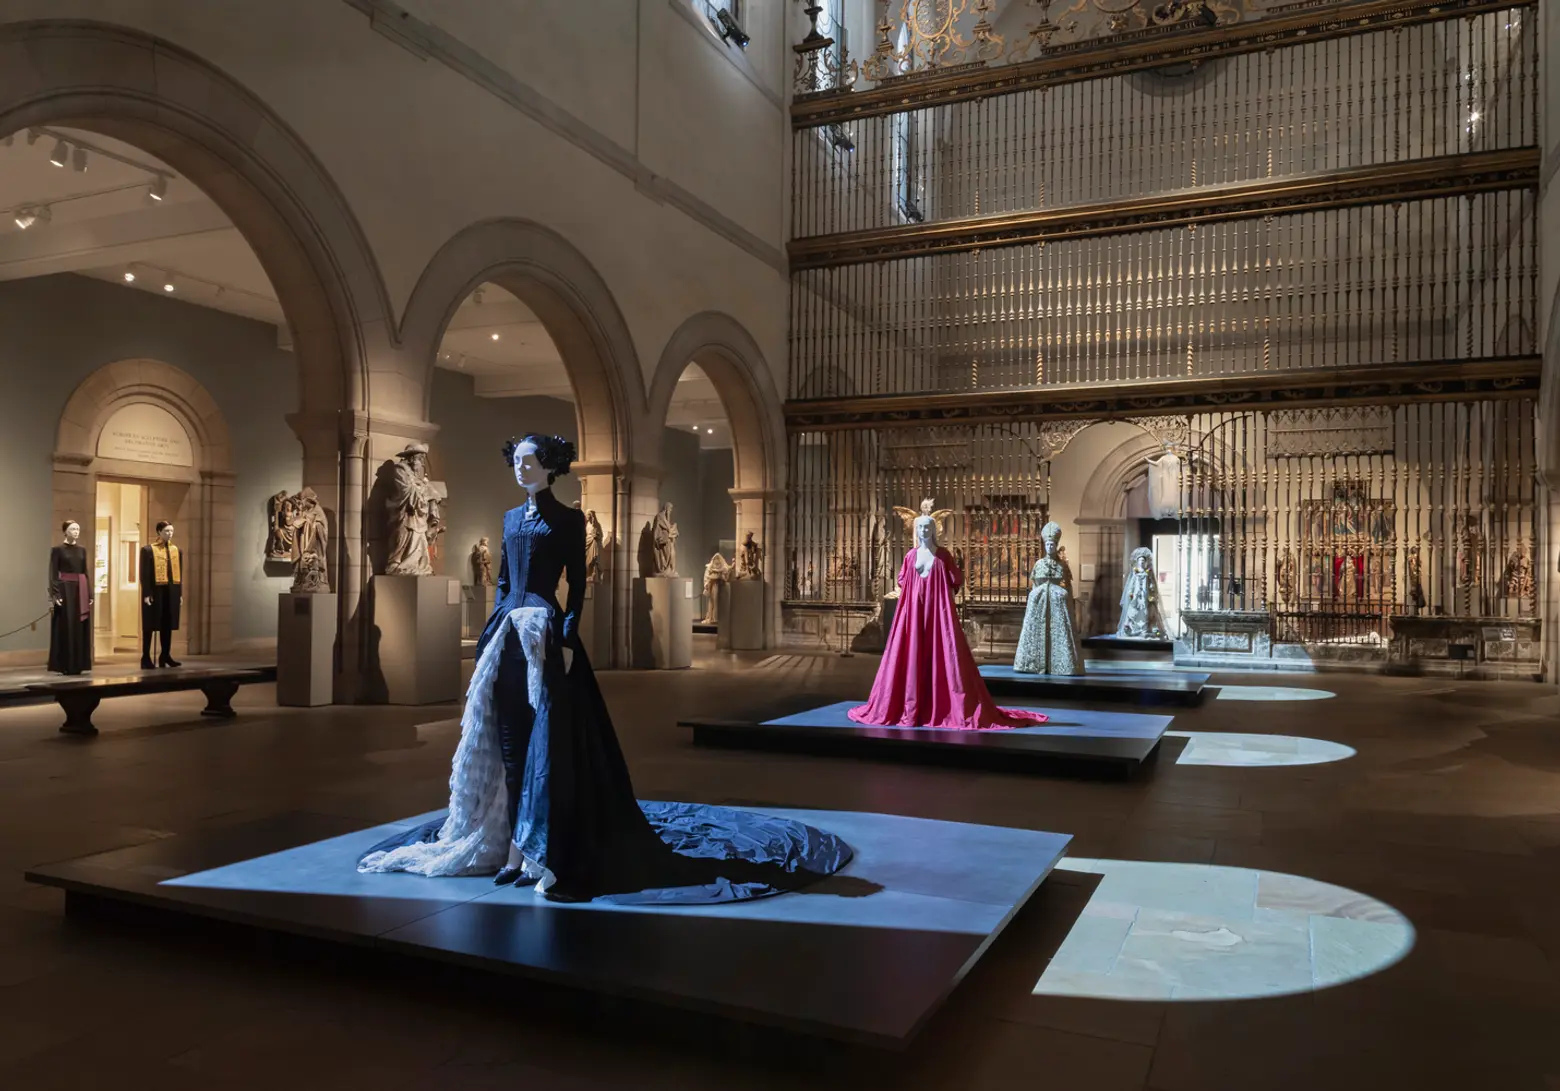 Tour the fashion and architecture of the Met’s “Heavenly Bodies” exhibit